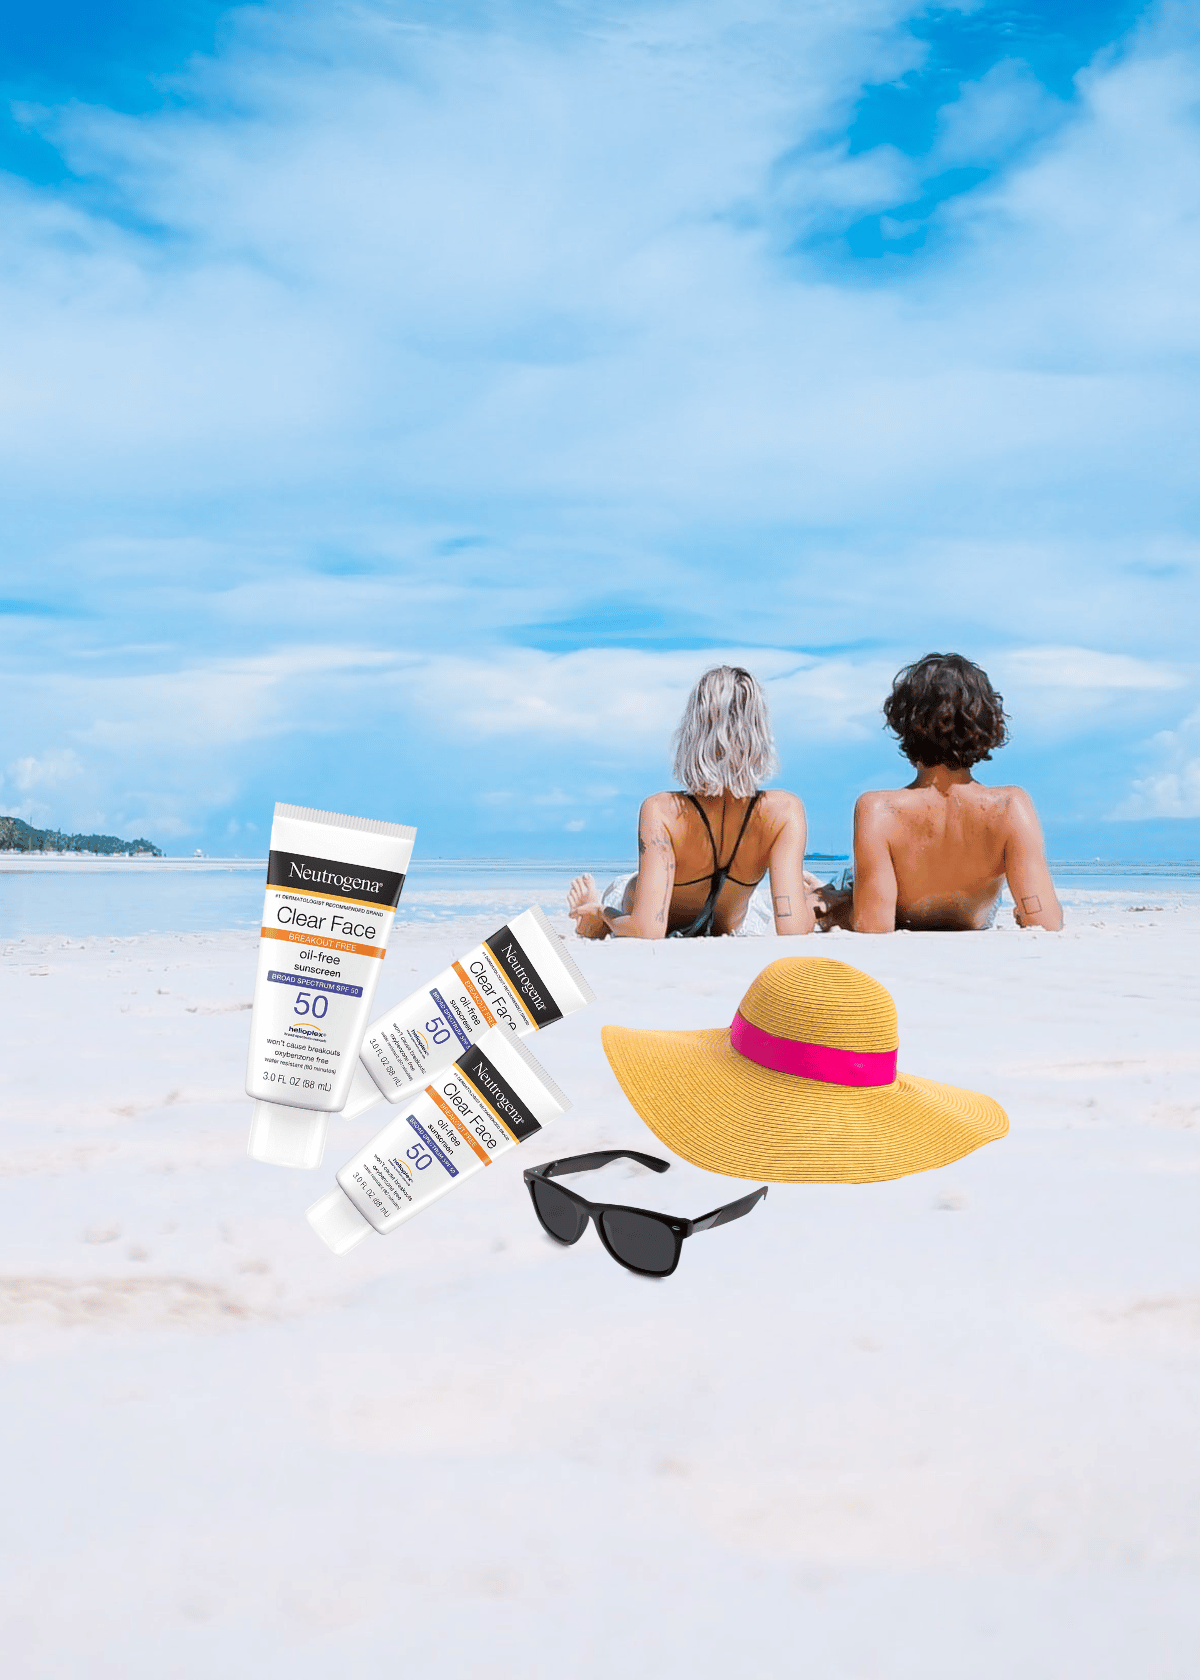 Top 5 Best Face Sunscreens, Highly Rated